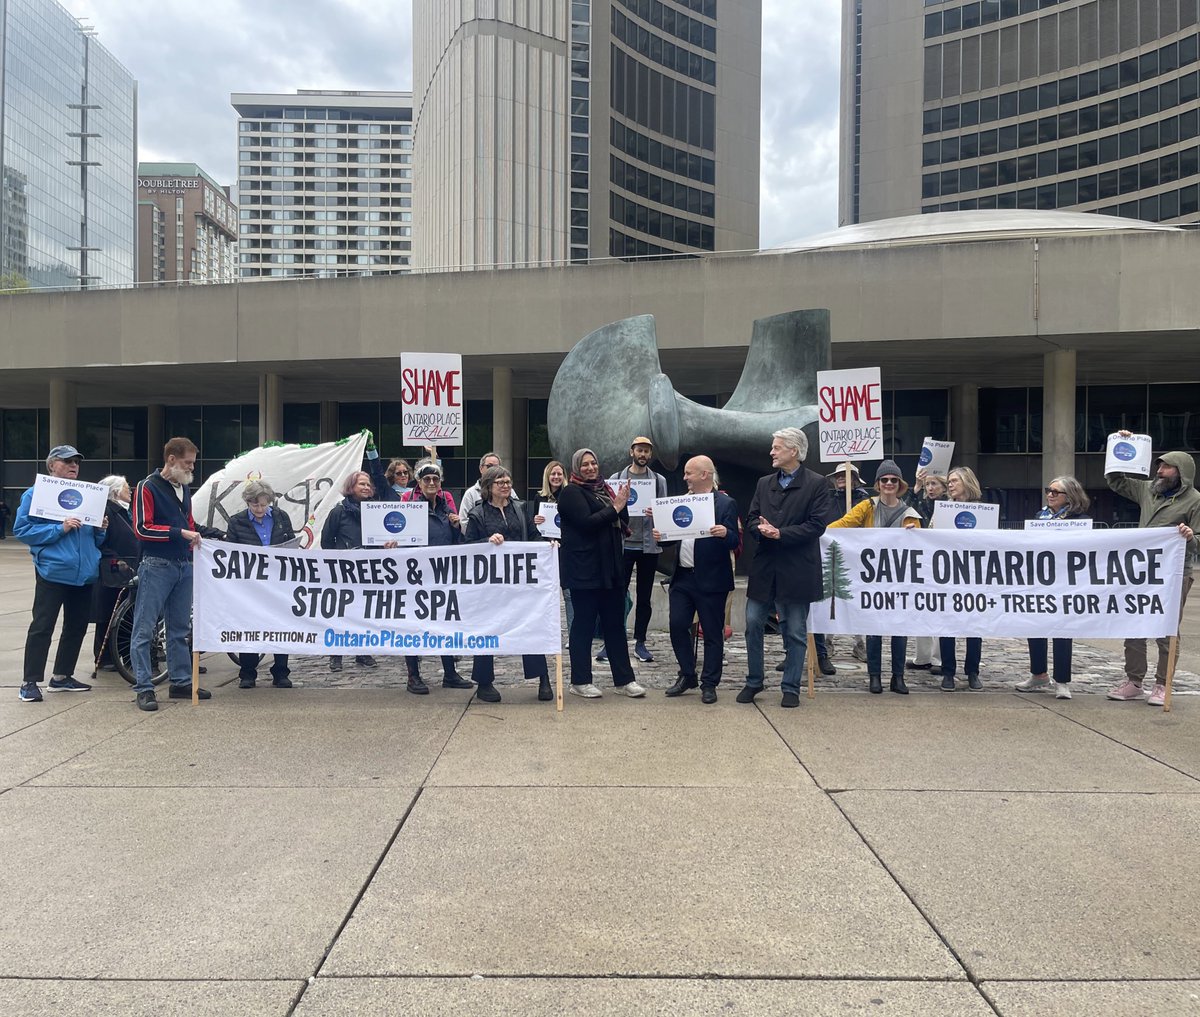 Energetic rally at City Hall before our court case! Thanks @chrisgloverndp and @ausmalik for speaking and showing your support for a public Ontario Place! Court case now scheduled for 11:30am at Osgoode Hall, Court C. #topoli #onpoli